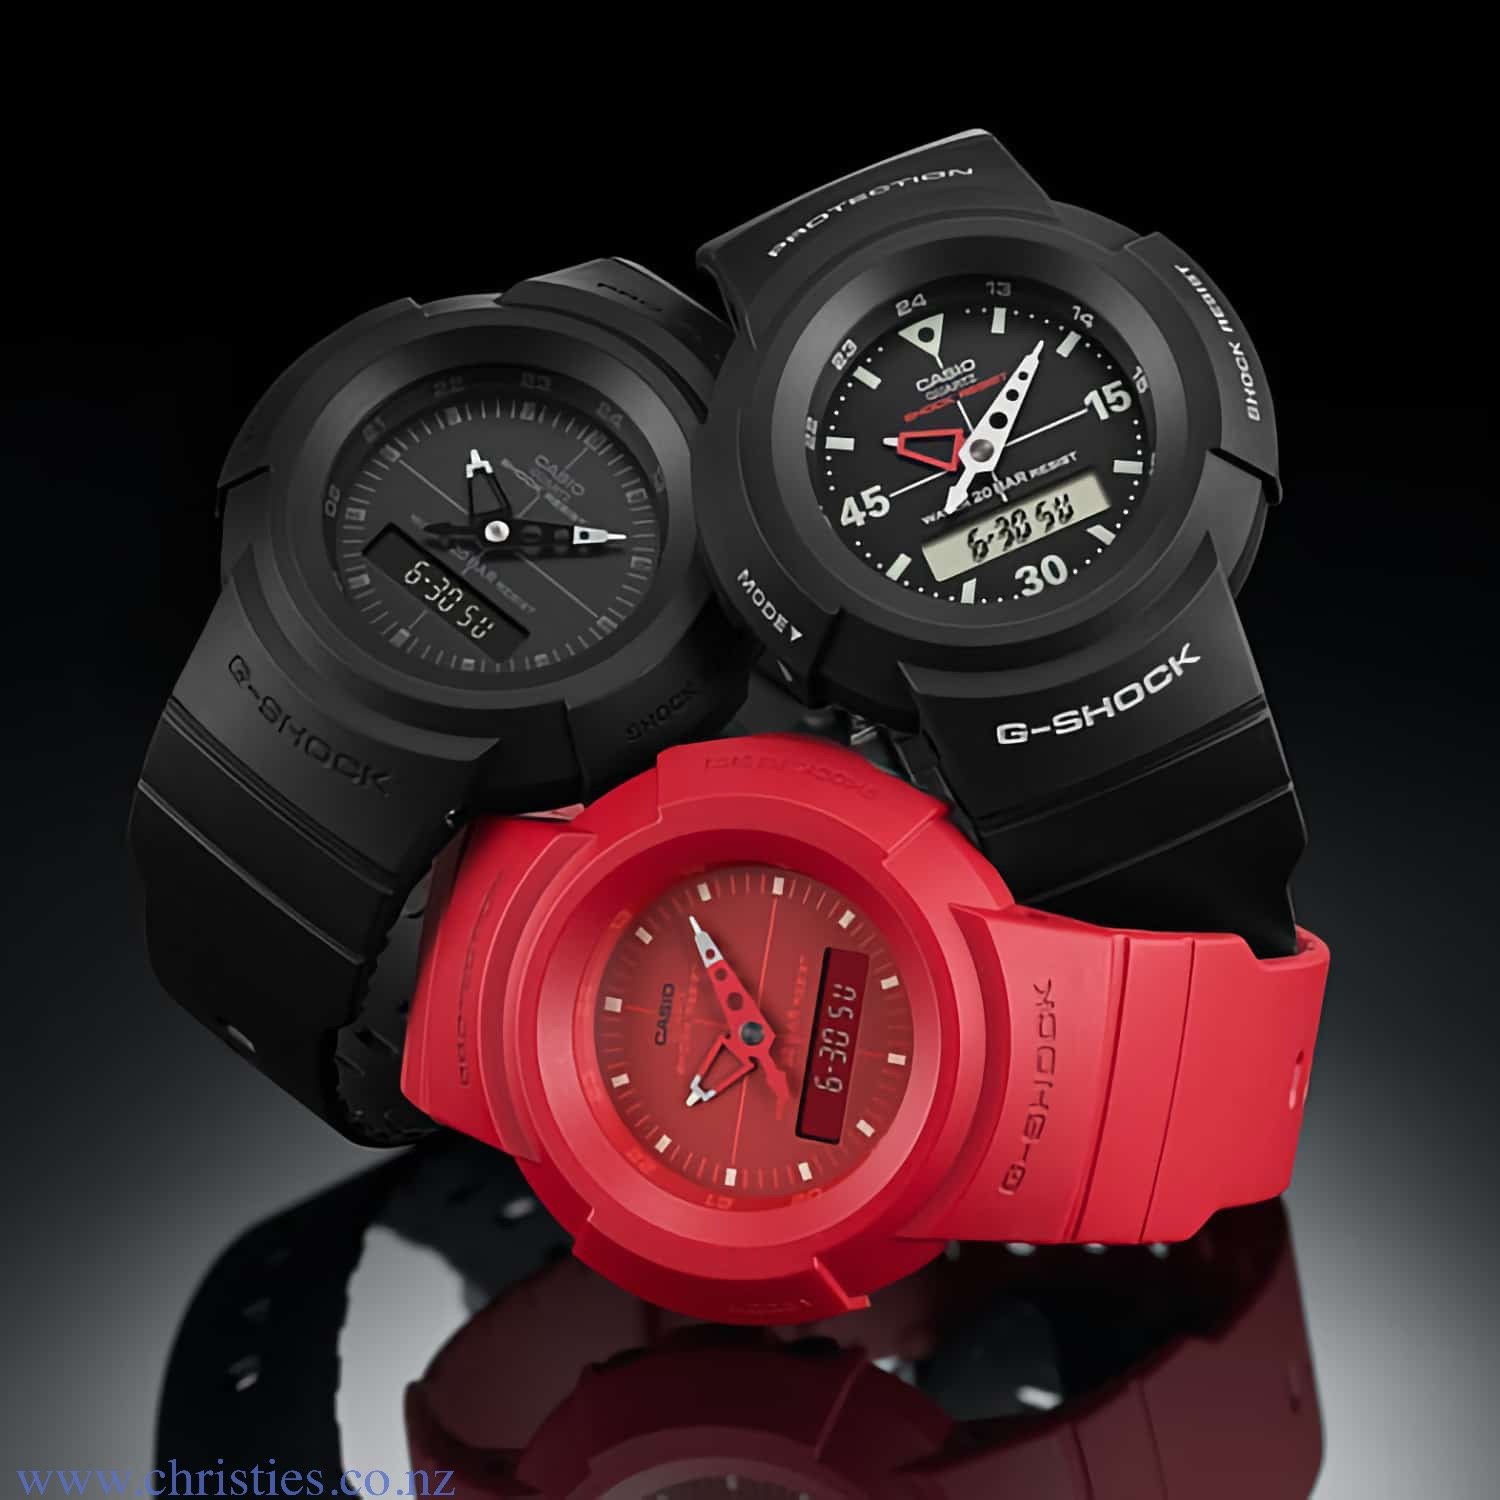 AW500BB-4E G-Shock Analog Digital Watch. These new models revive the classic AW-500 Series with new looks that embody the unmatched toughness for which G-SHOCK has been renowned since its inception back in 1983. Making its initial appearance in 1989 as G-